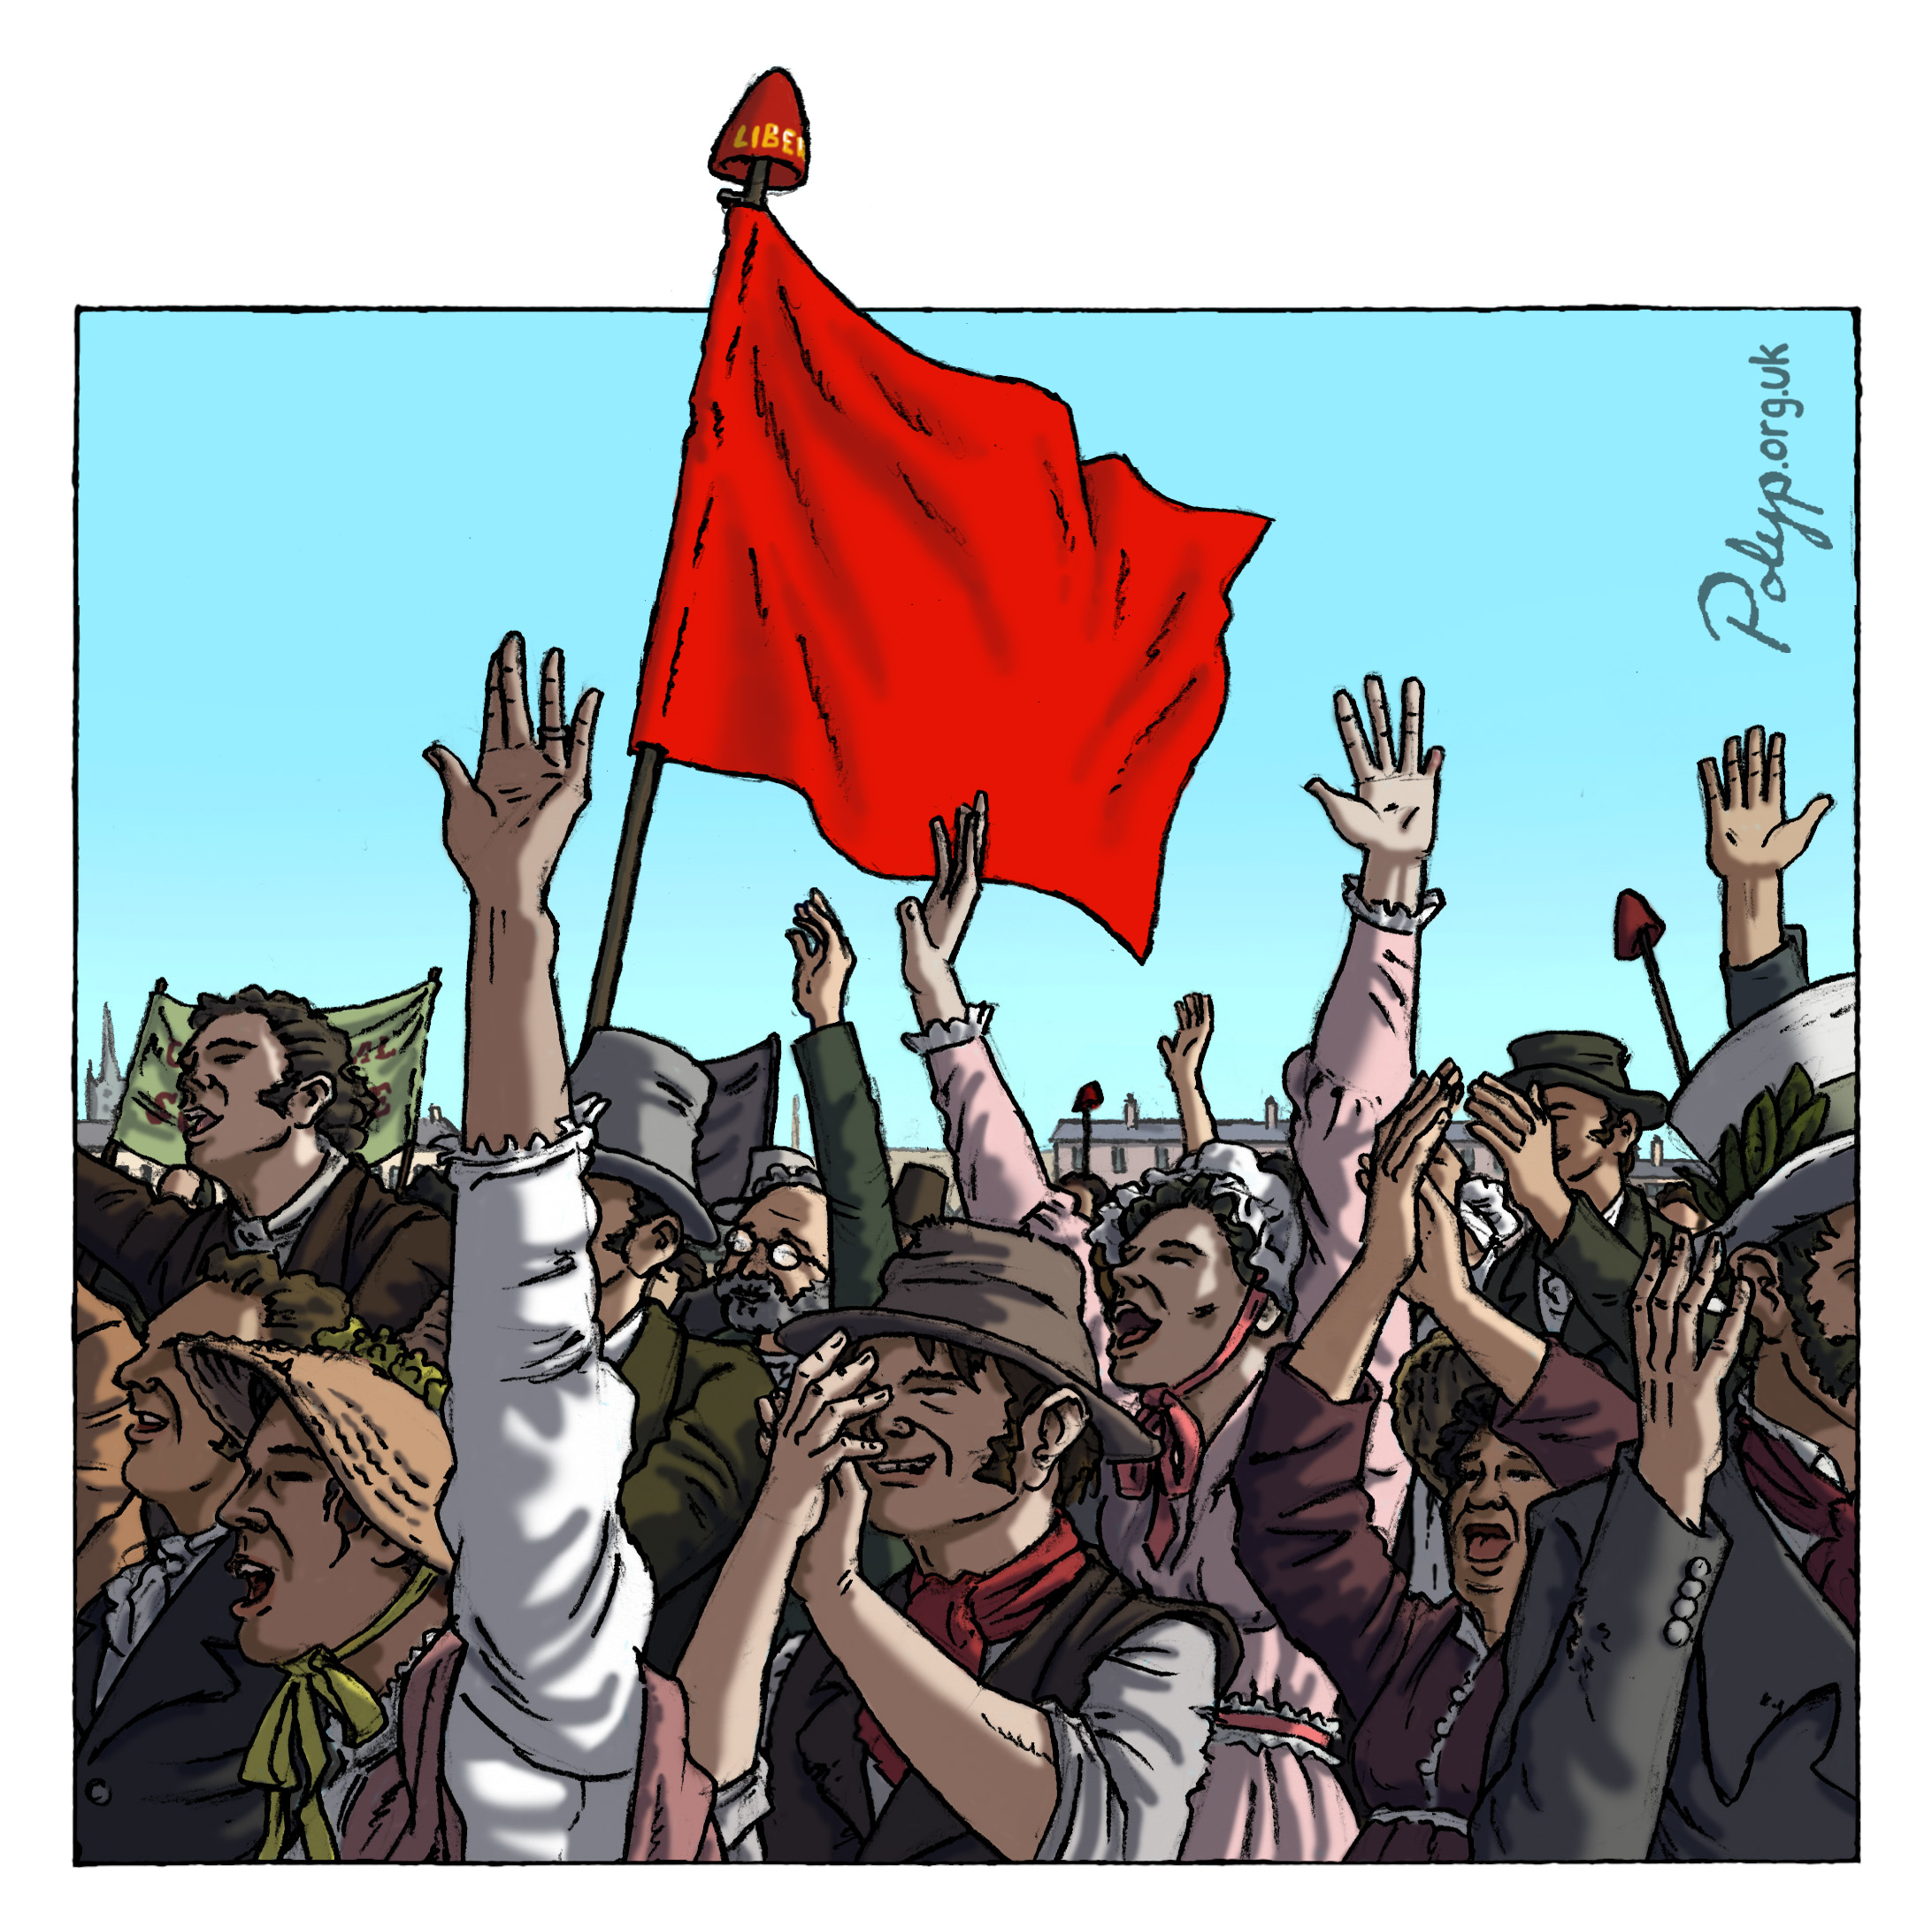 red flag with star in middle